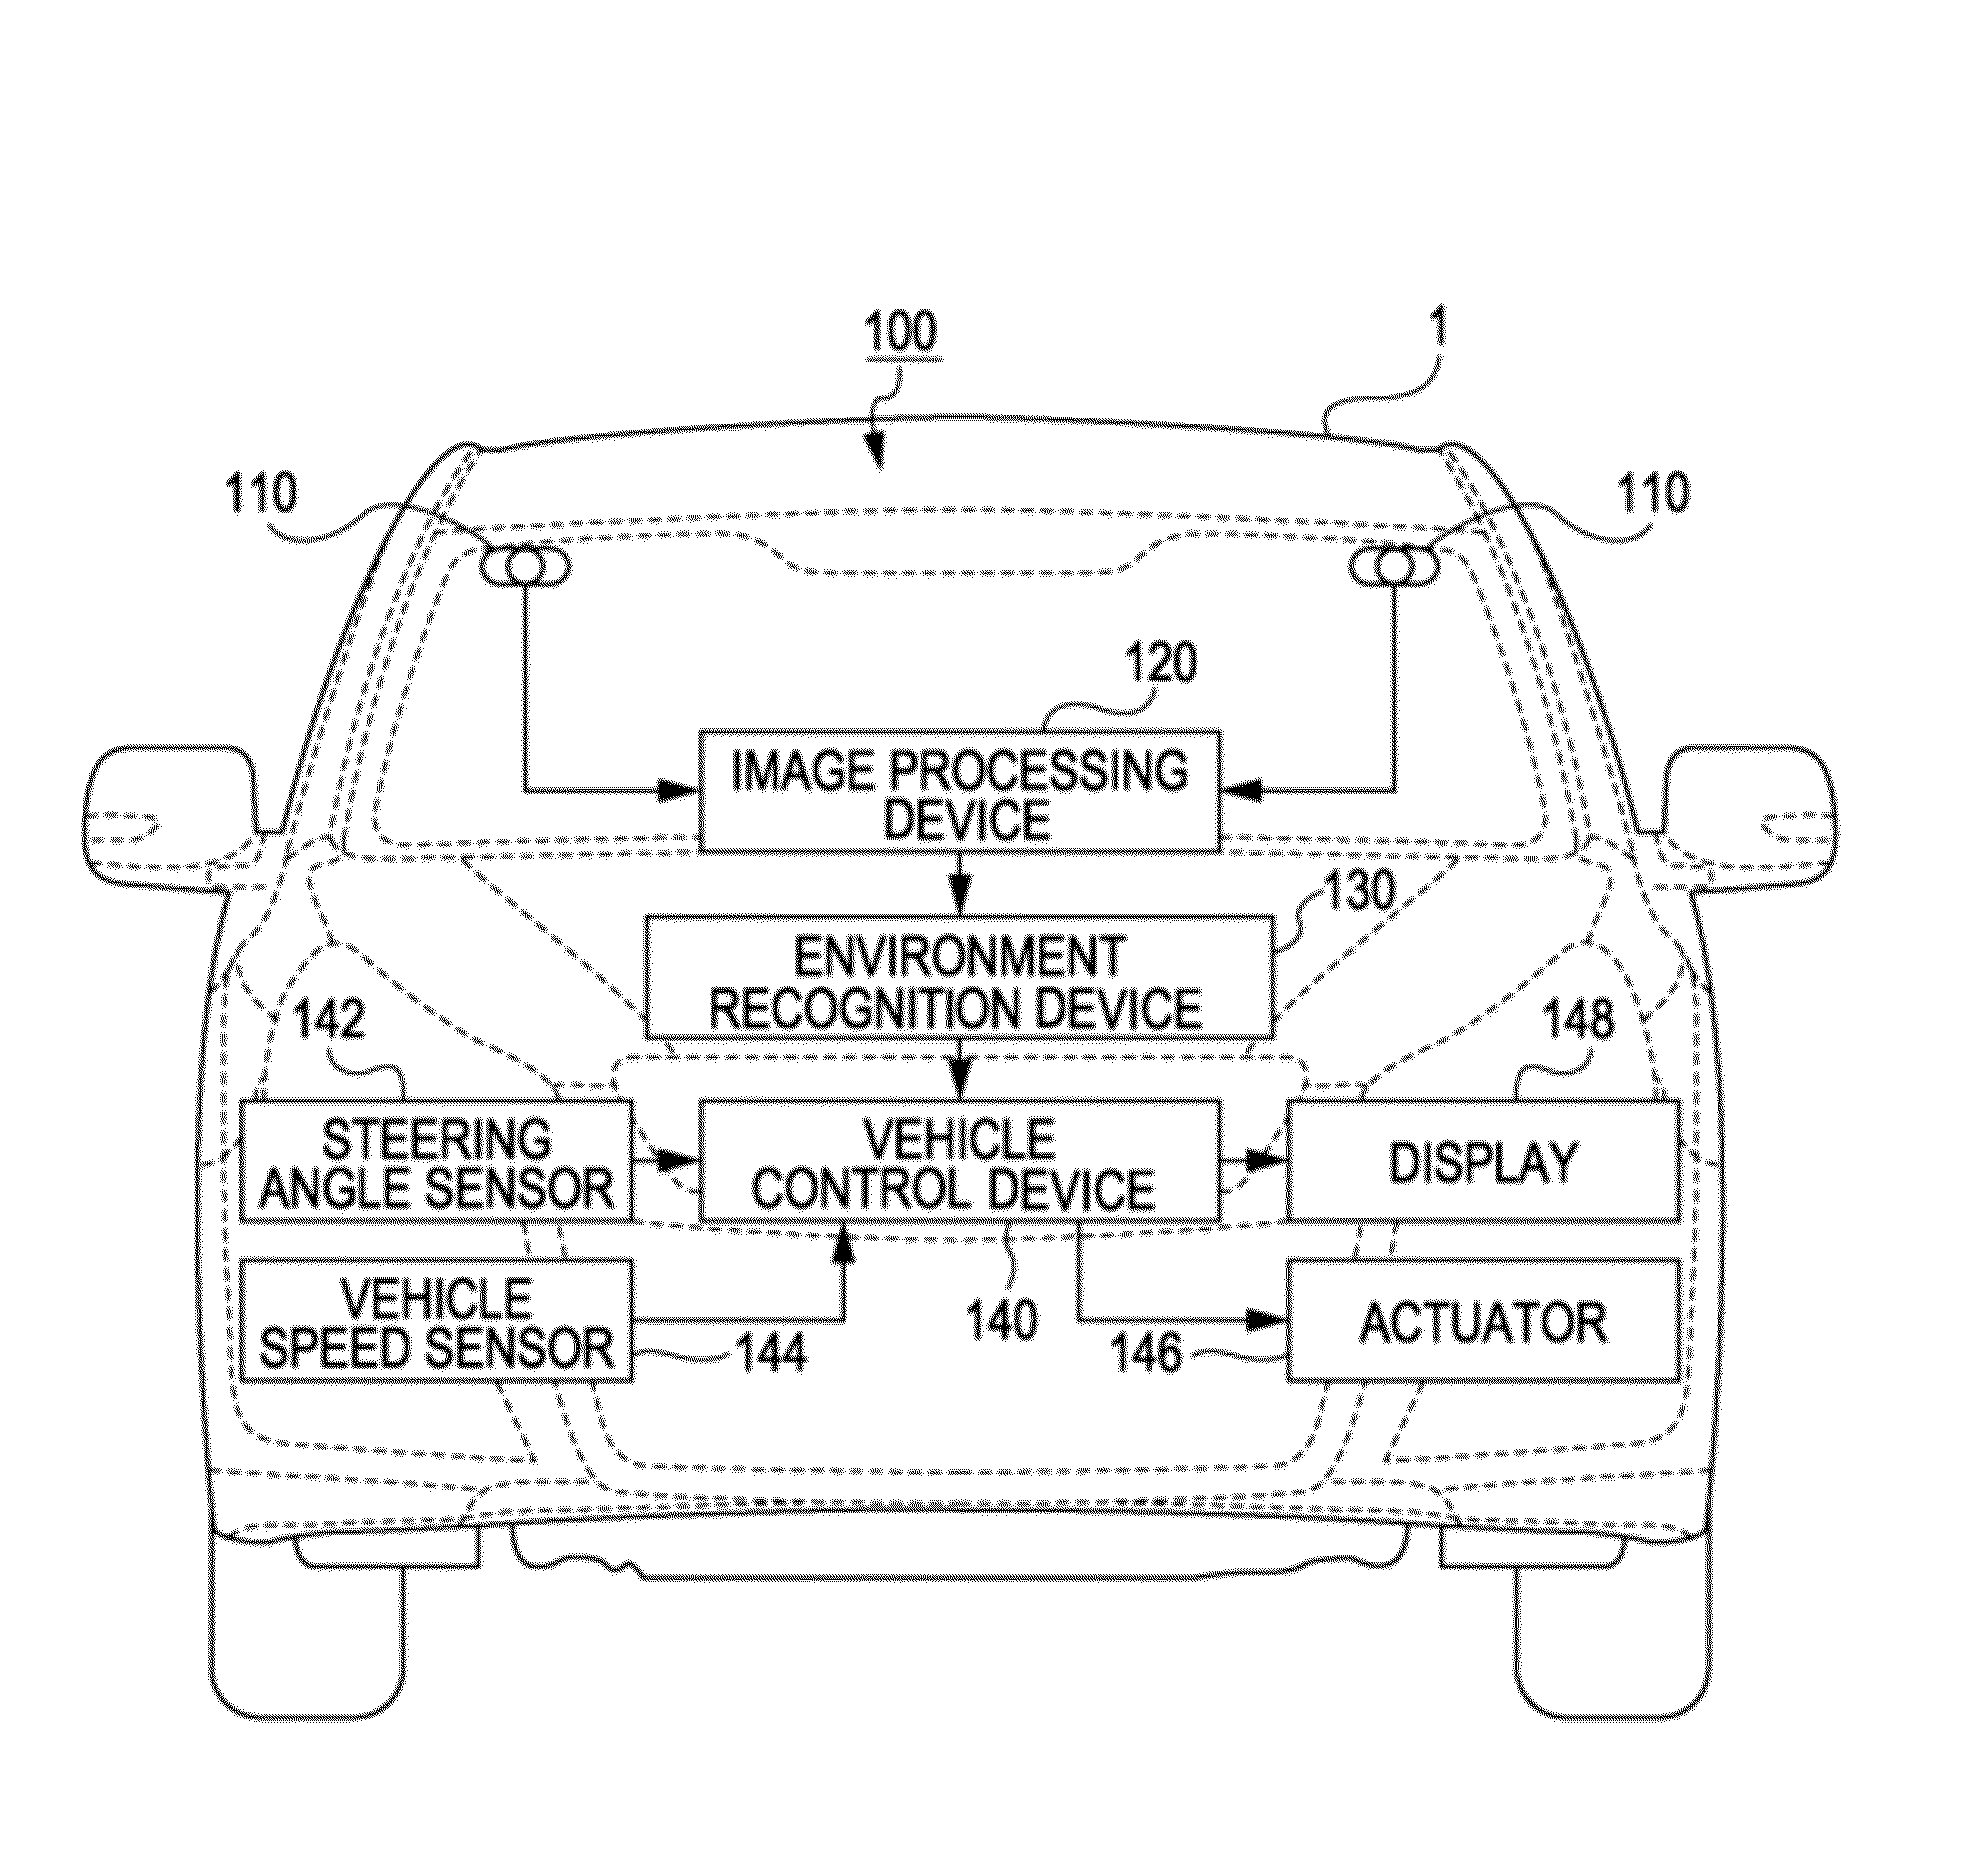 Environment recognition device and environment recognition method